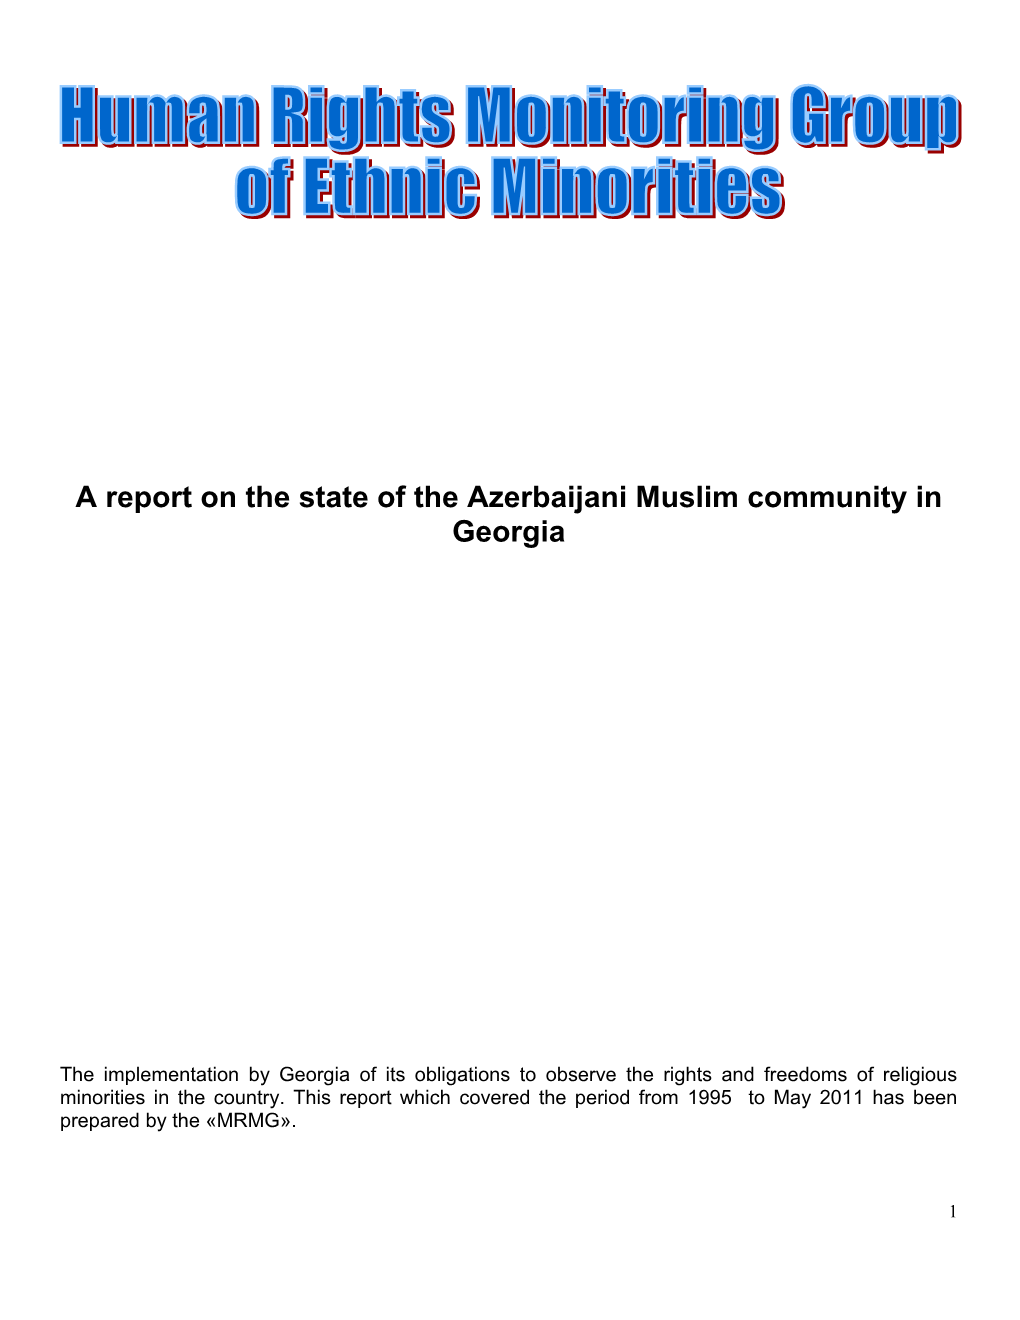 A Report on the State of the Azerbaijani Muslim Community in Georgia